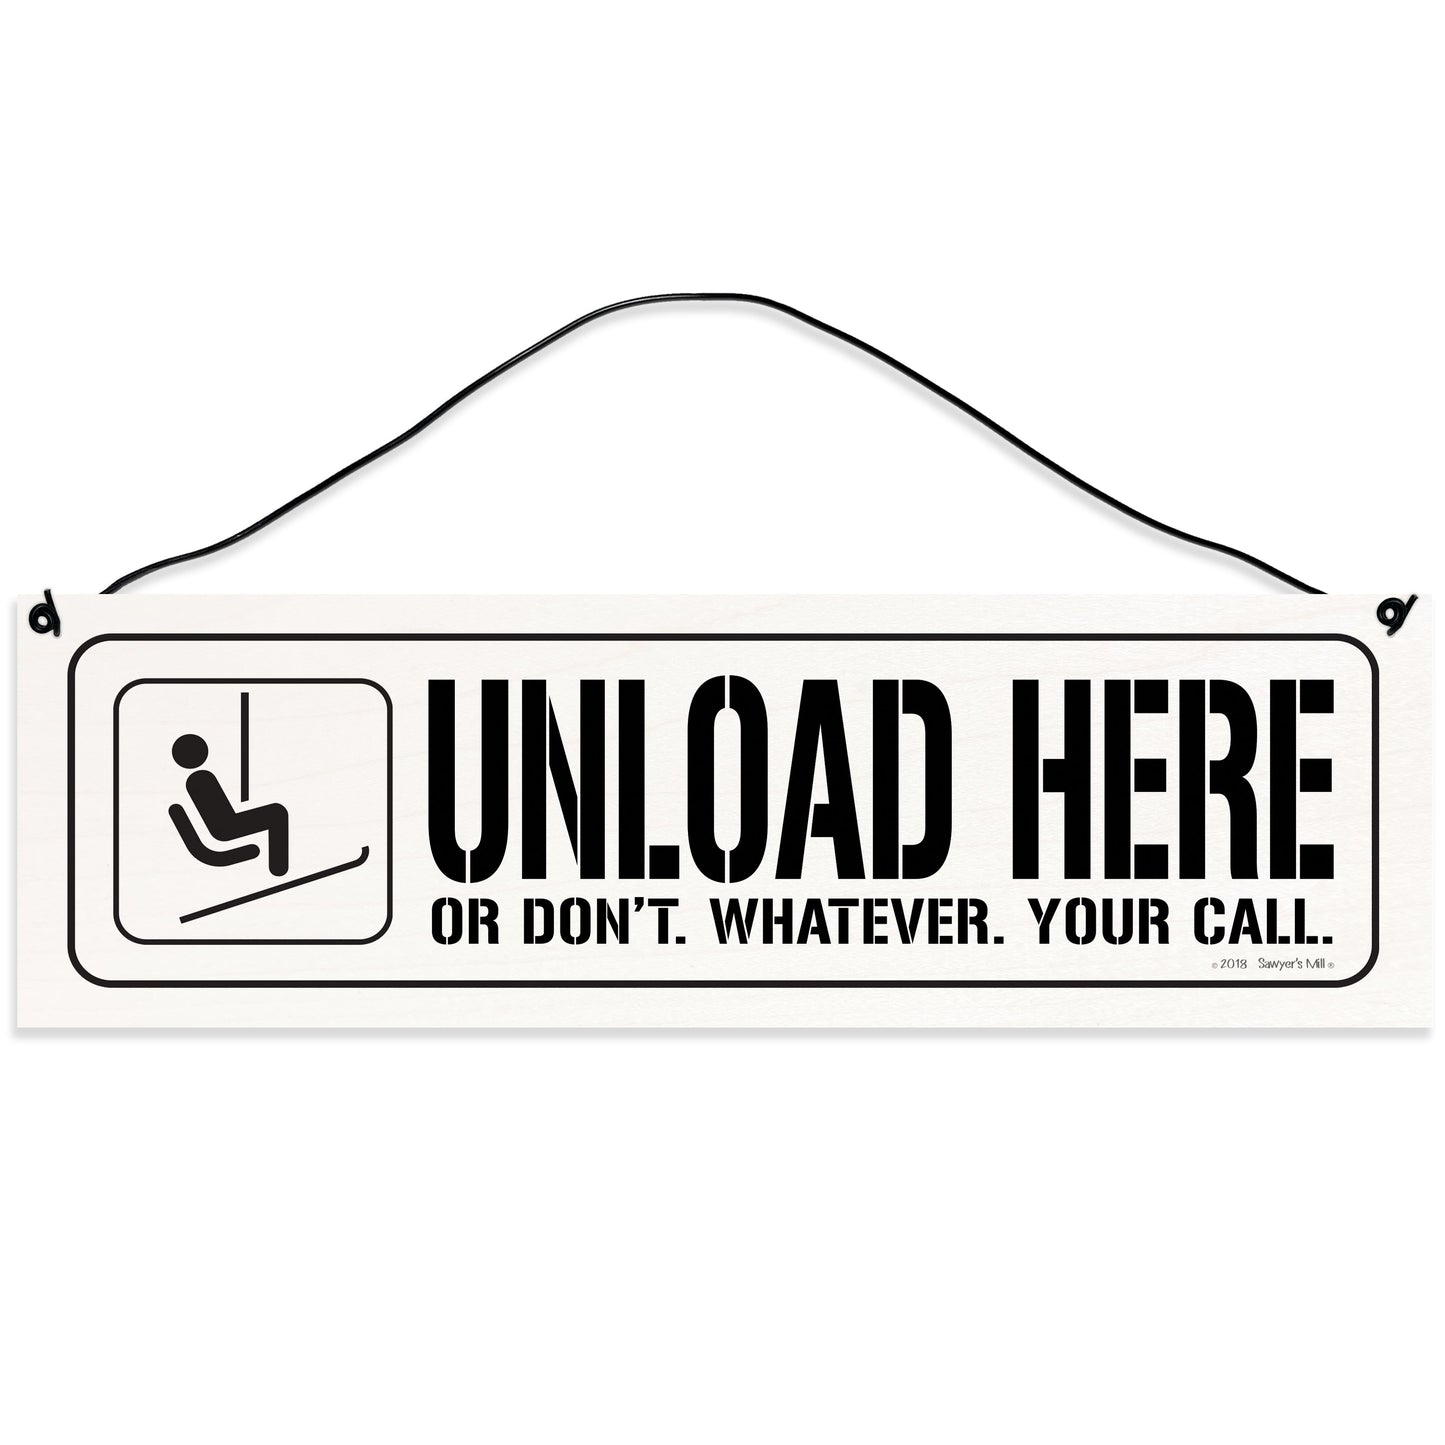 Sawyer's Mill - Unload Here or Don't. Whatever. Your Call. Wood Sign for Home or Office. Measures 3x10 inches.